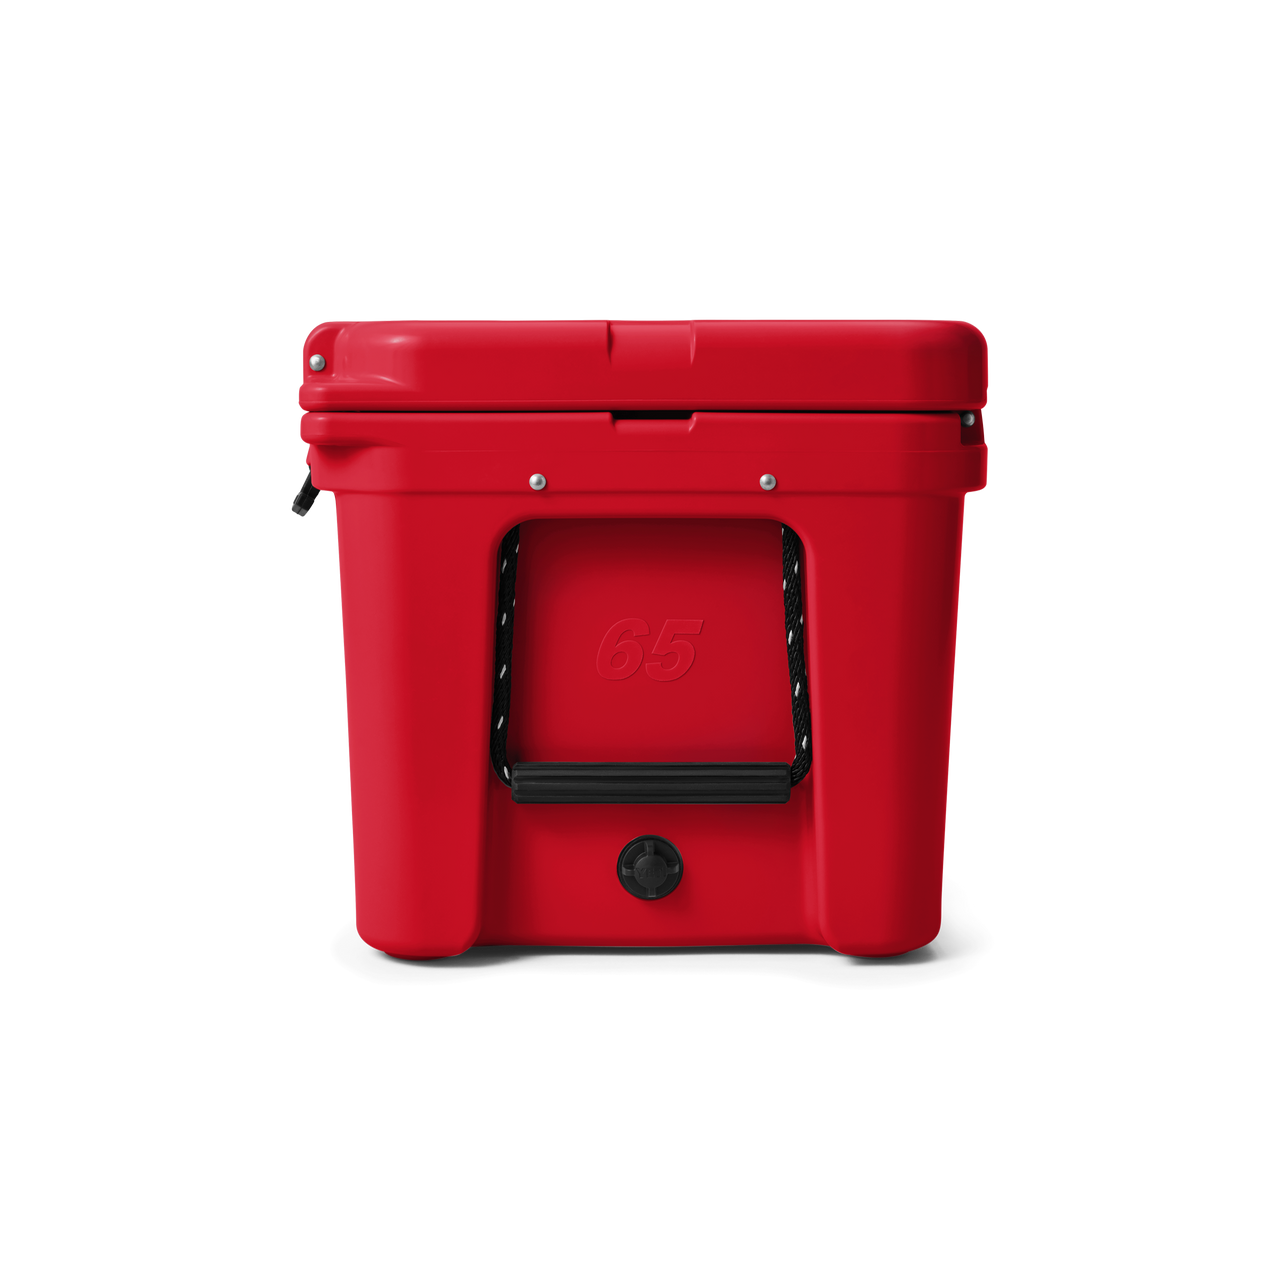 YETI Tundra 65 Rescue Red - Backcountry & Beyond